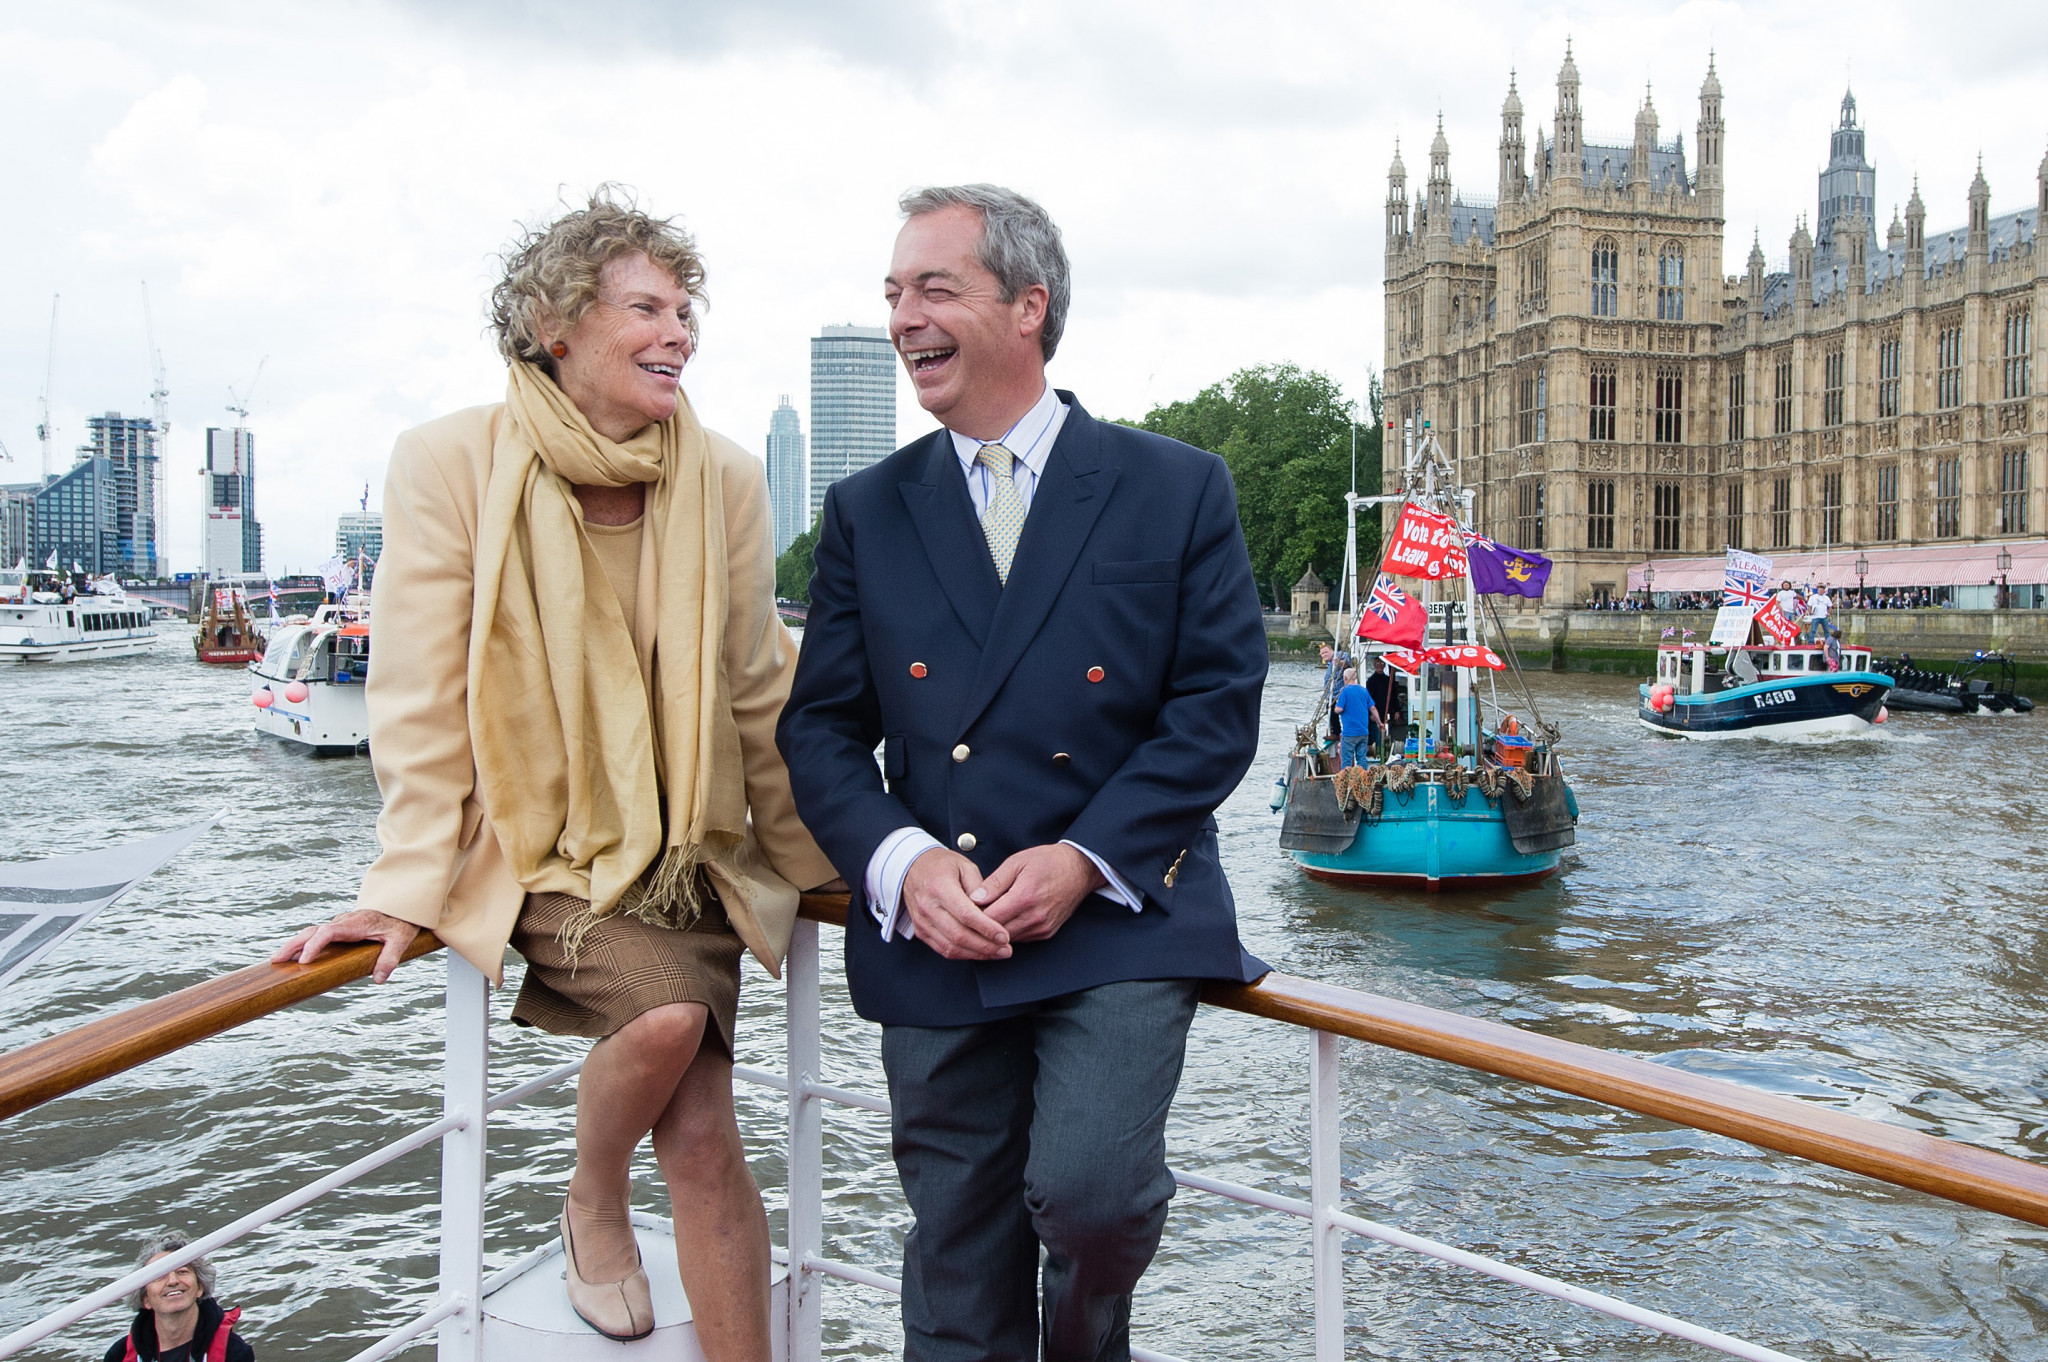 Hoey, pictured here with Nigel Farage, has never been afraid of straight talking ©Getty Images